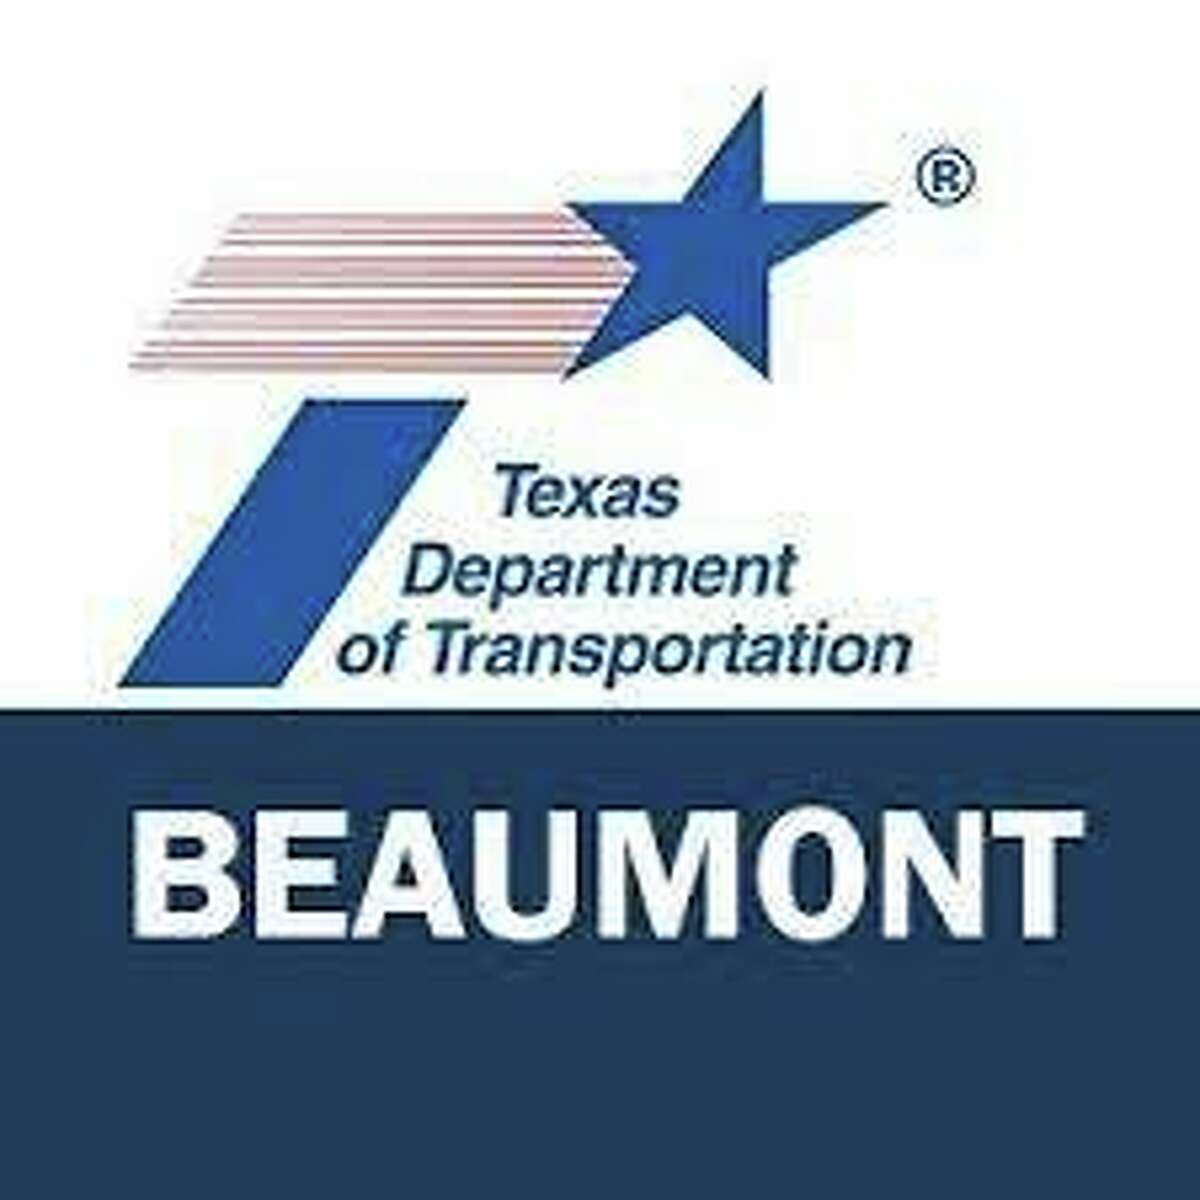 The Texas Department of Transportation expects the outside lane of Interstate 10 westbound from Smith Road to Boyt Road to be closed overnight on Tuesday, Wednesday, and Thursday night.